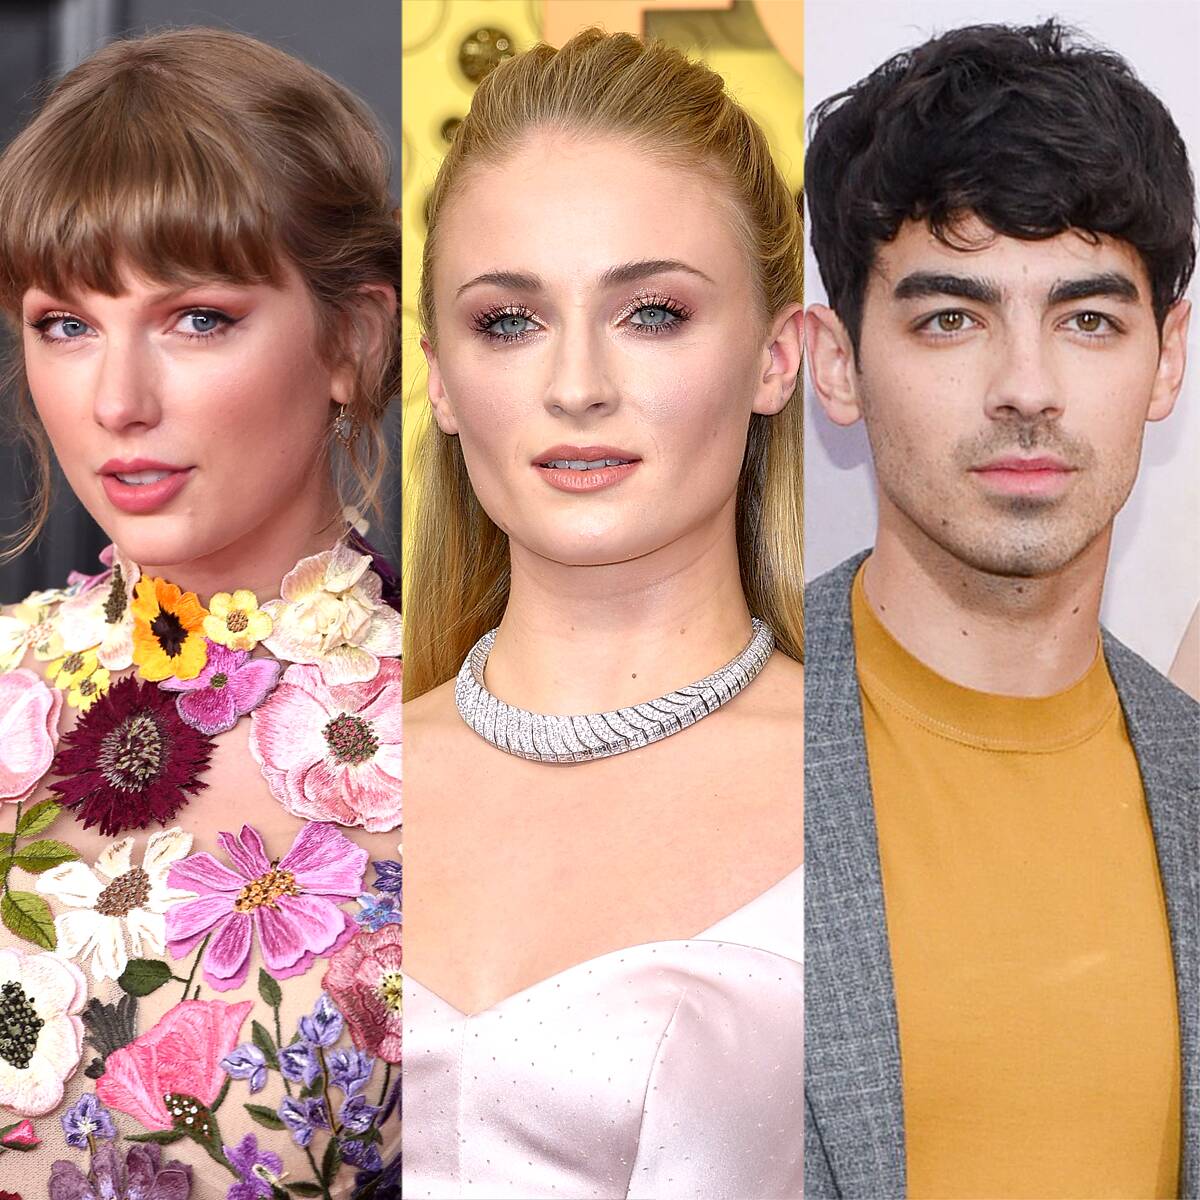 Sophie Turner Reacts to Taylor Swift's Song "Mr. Perfectly Fine" Amid Rumors It's About Joe Jonas